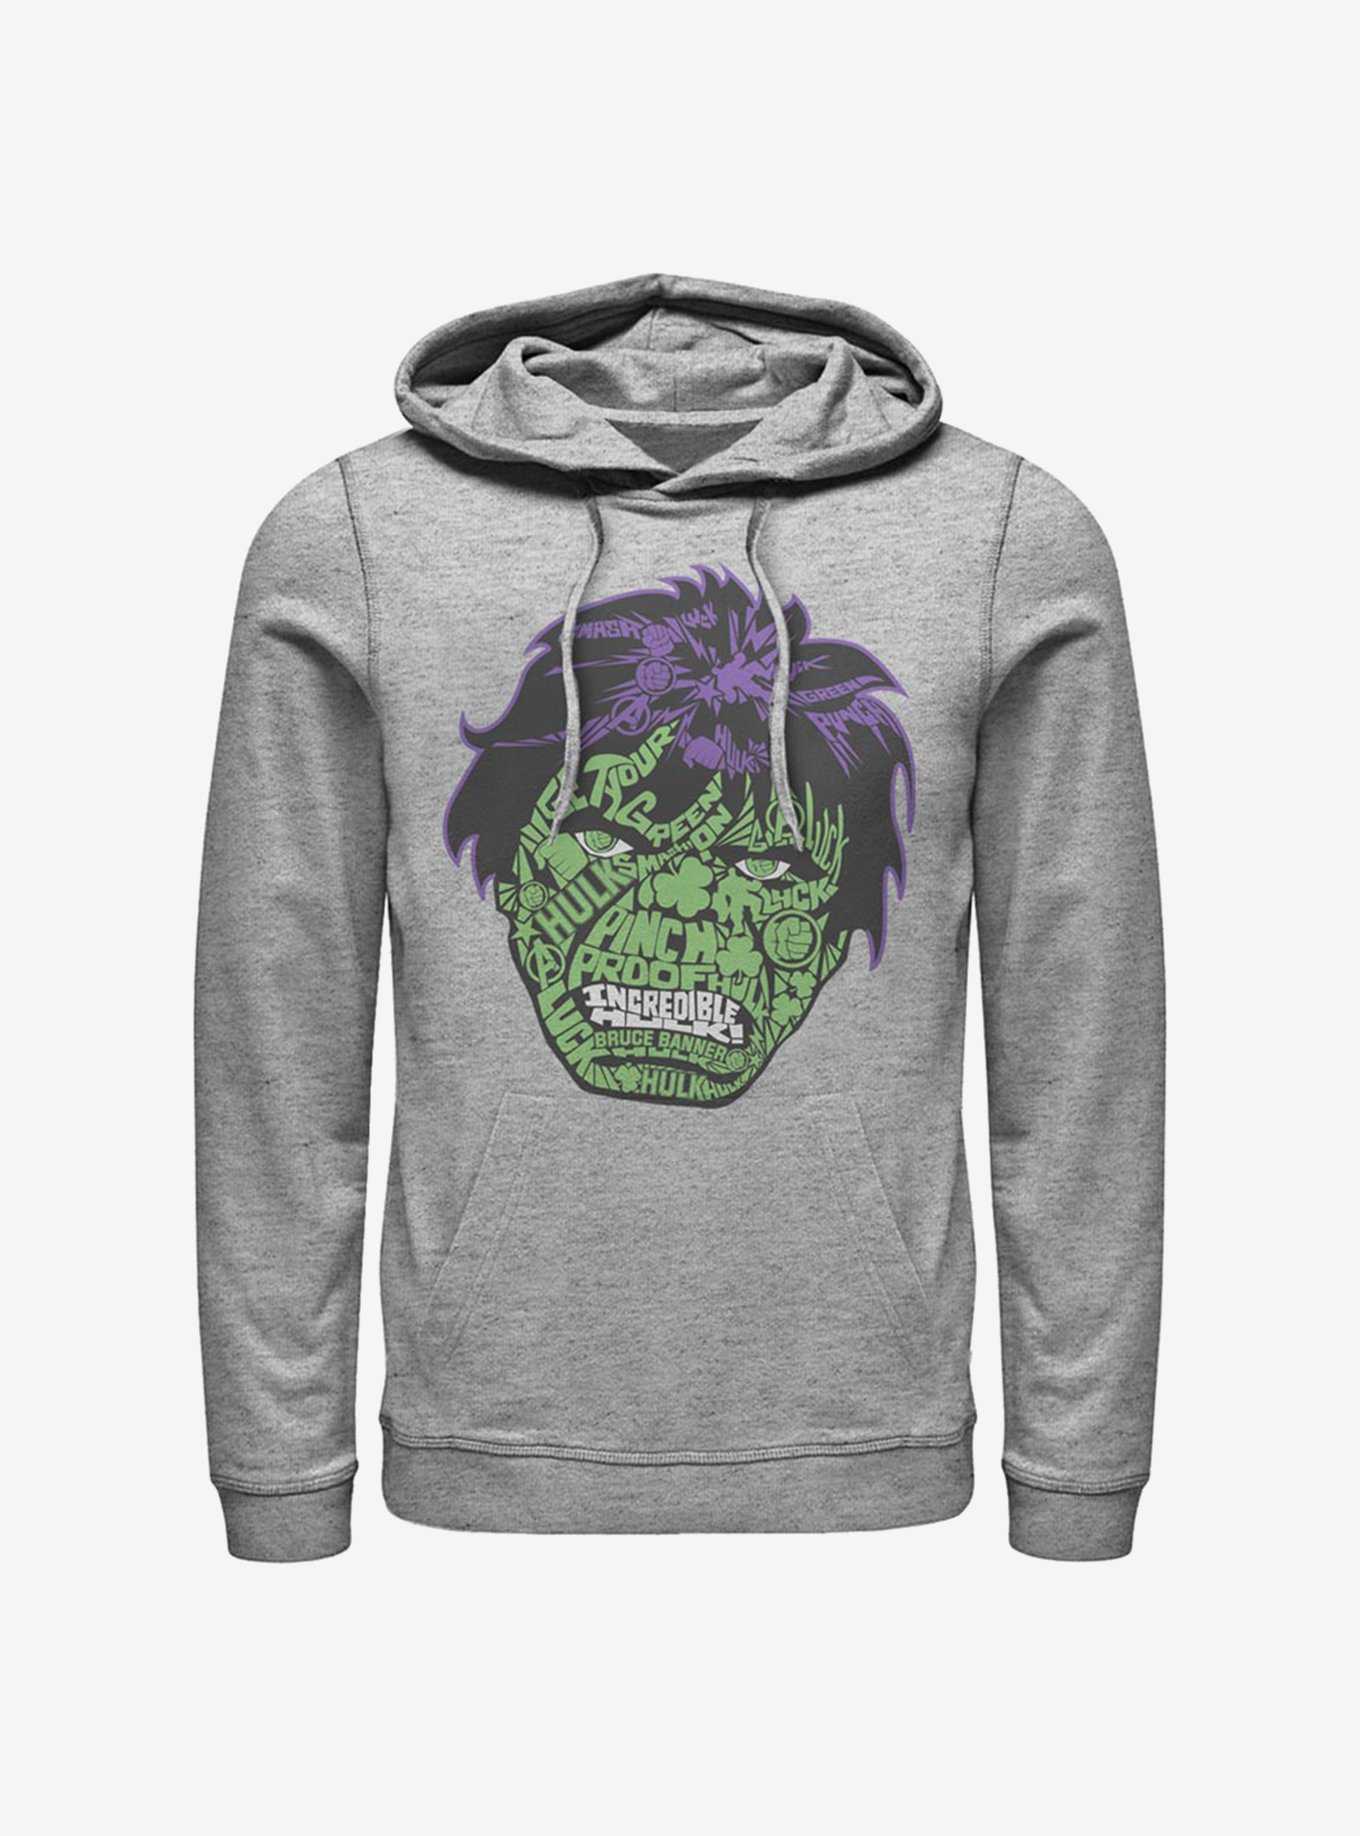 Marvel The Hulk Luck Icons Face Hoodie, , hi-res